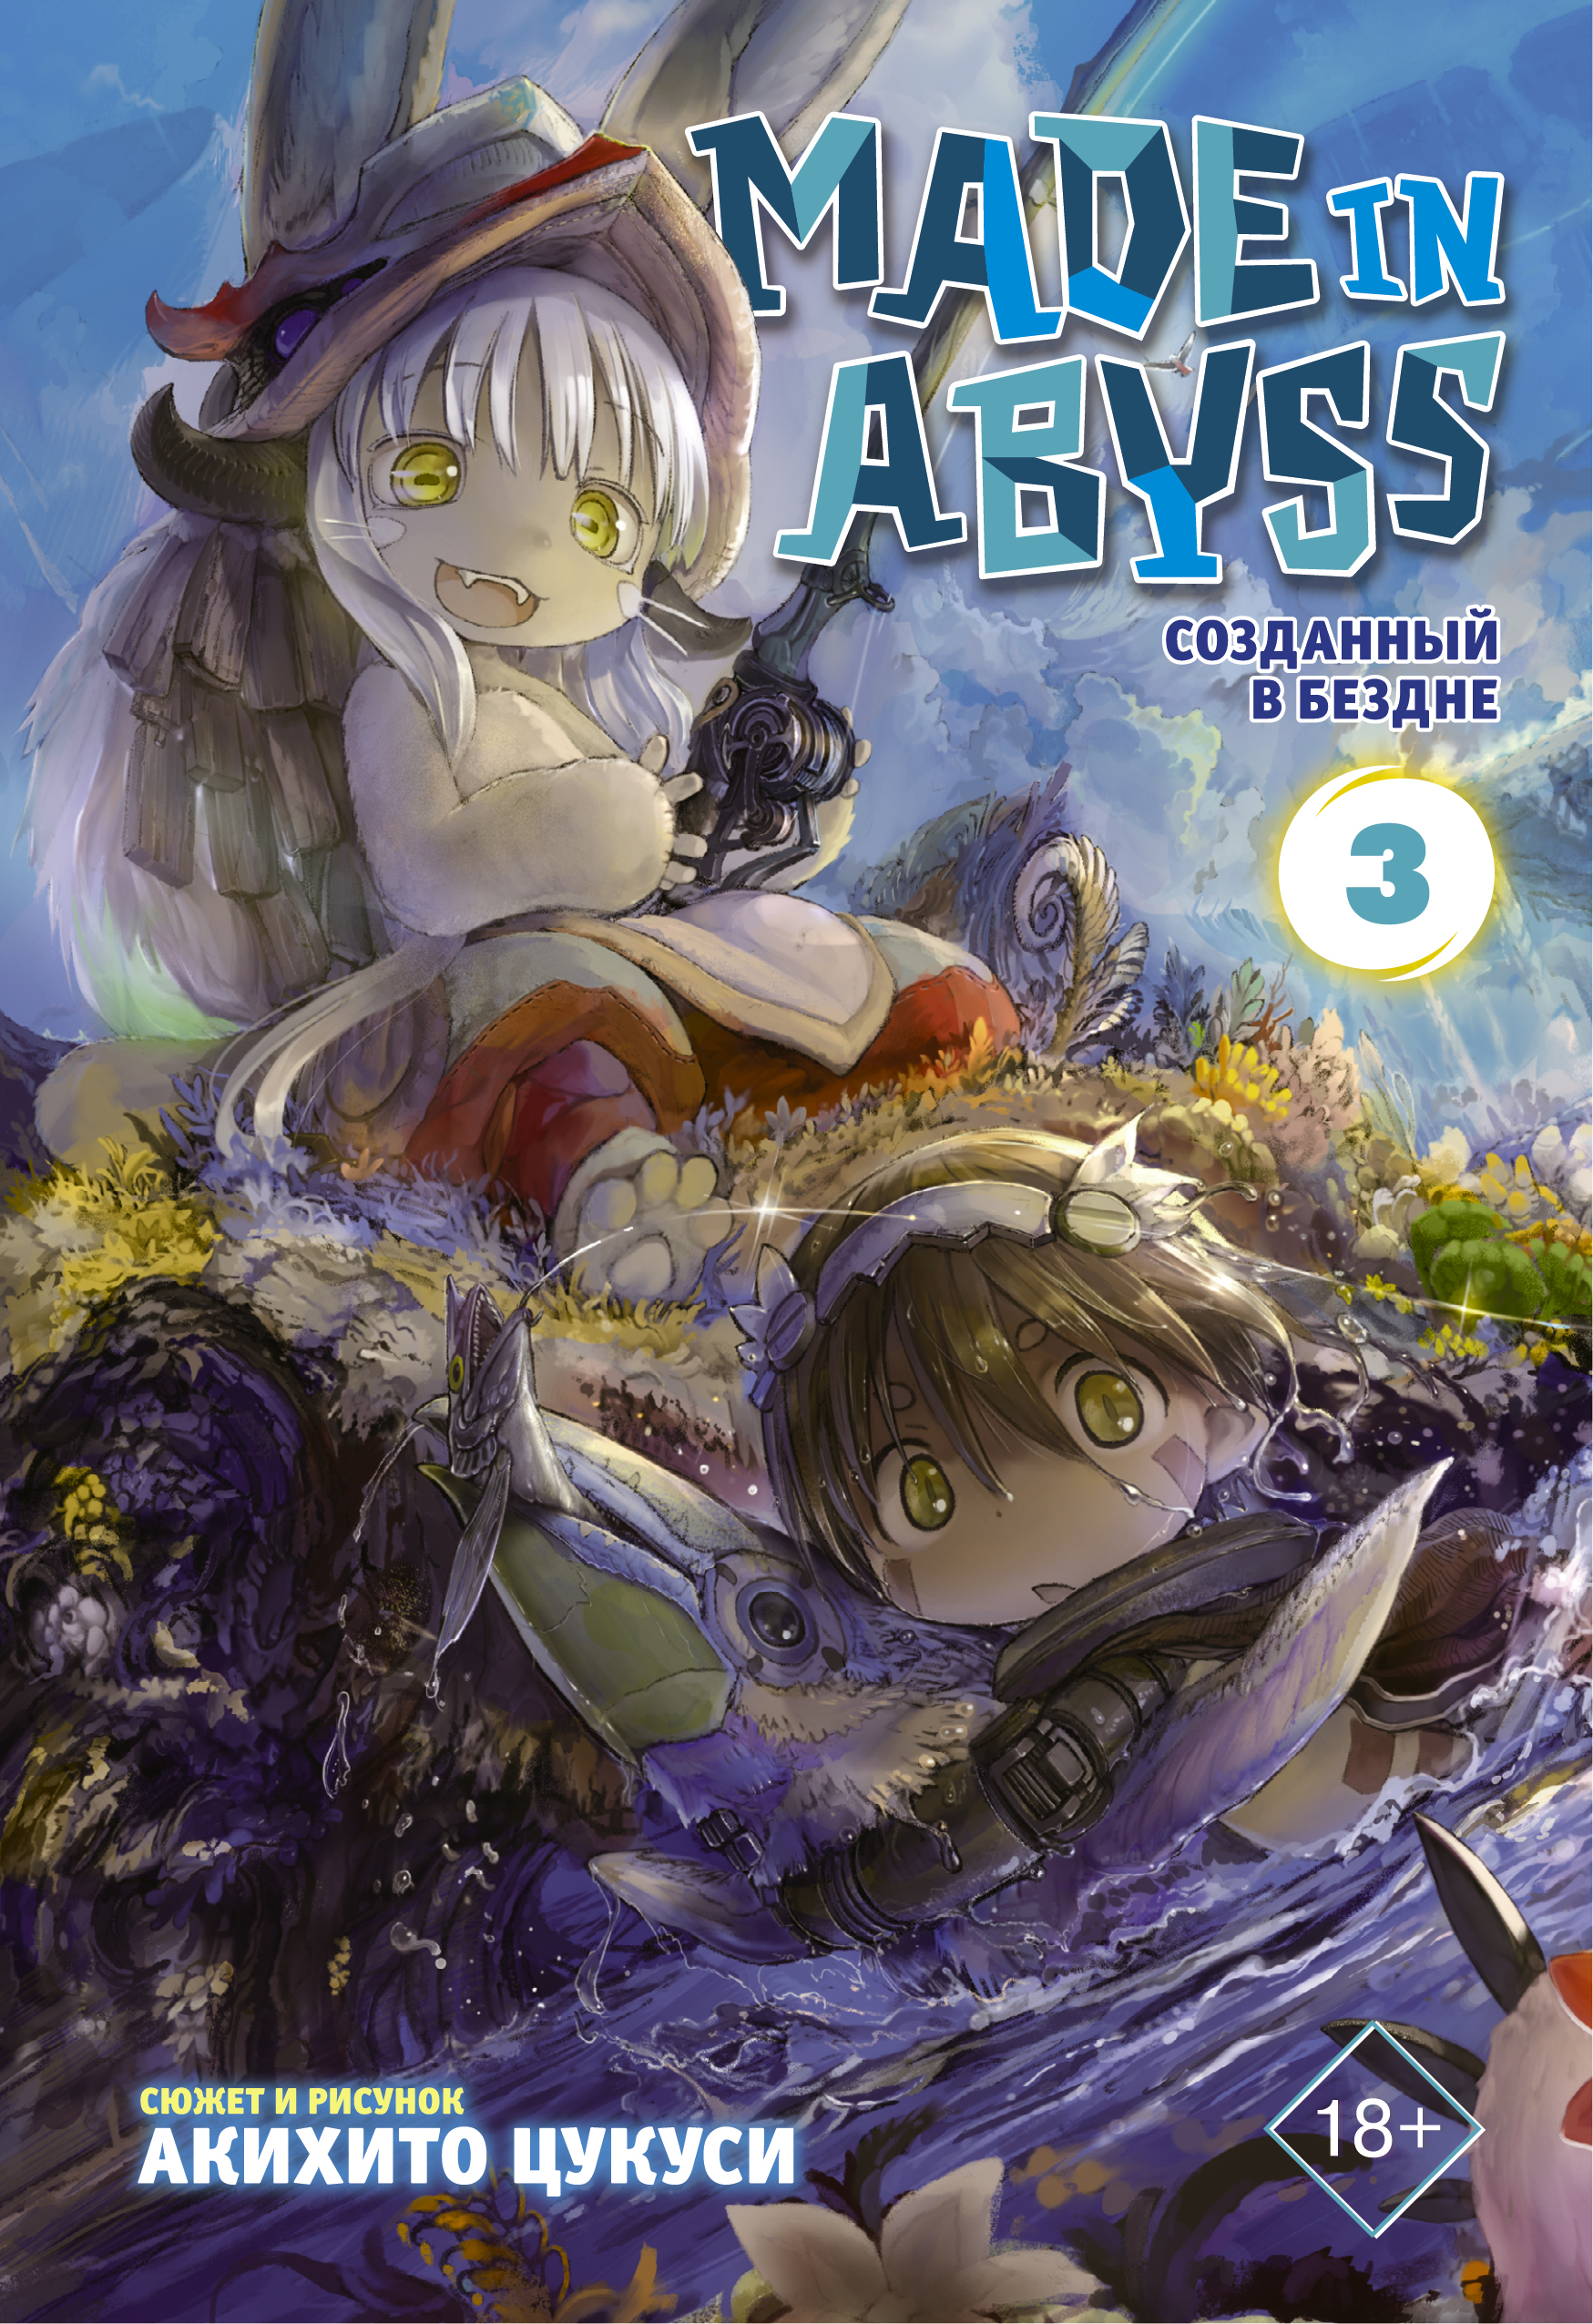 Made in Abyss. Созданный в Бездне. Том 3 набор манга made in abyss созданный в бездне том 4 закладка i m an anime person магнитная 6 pack